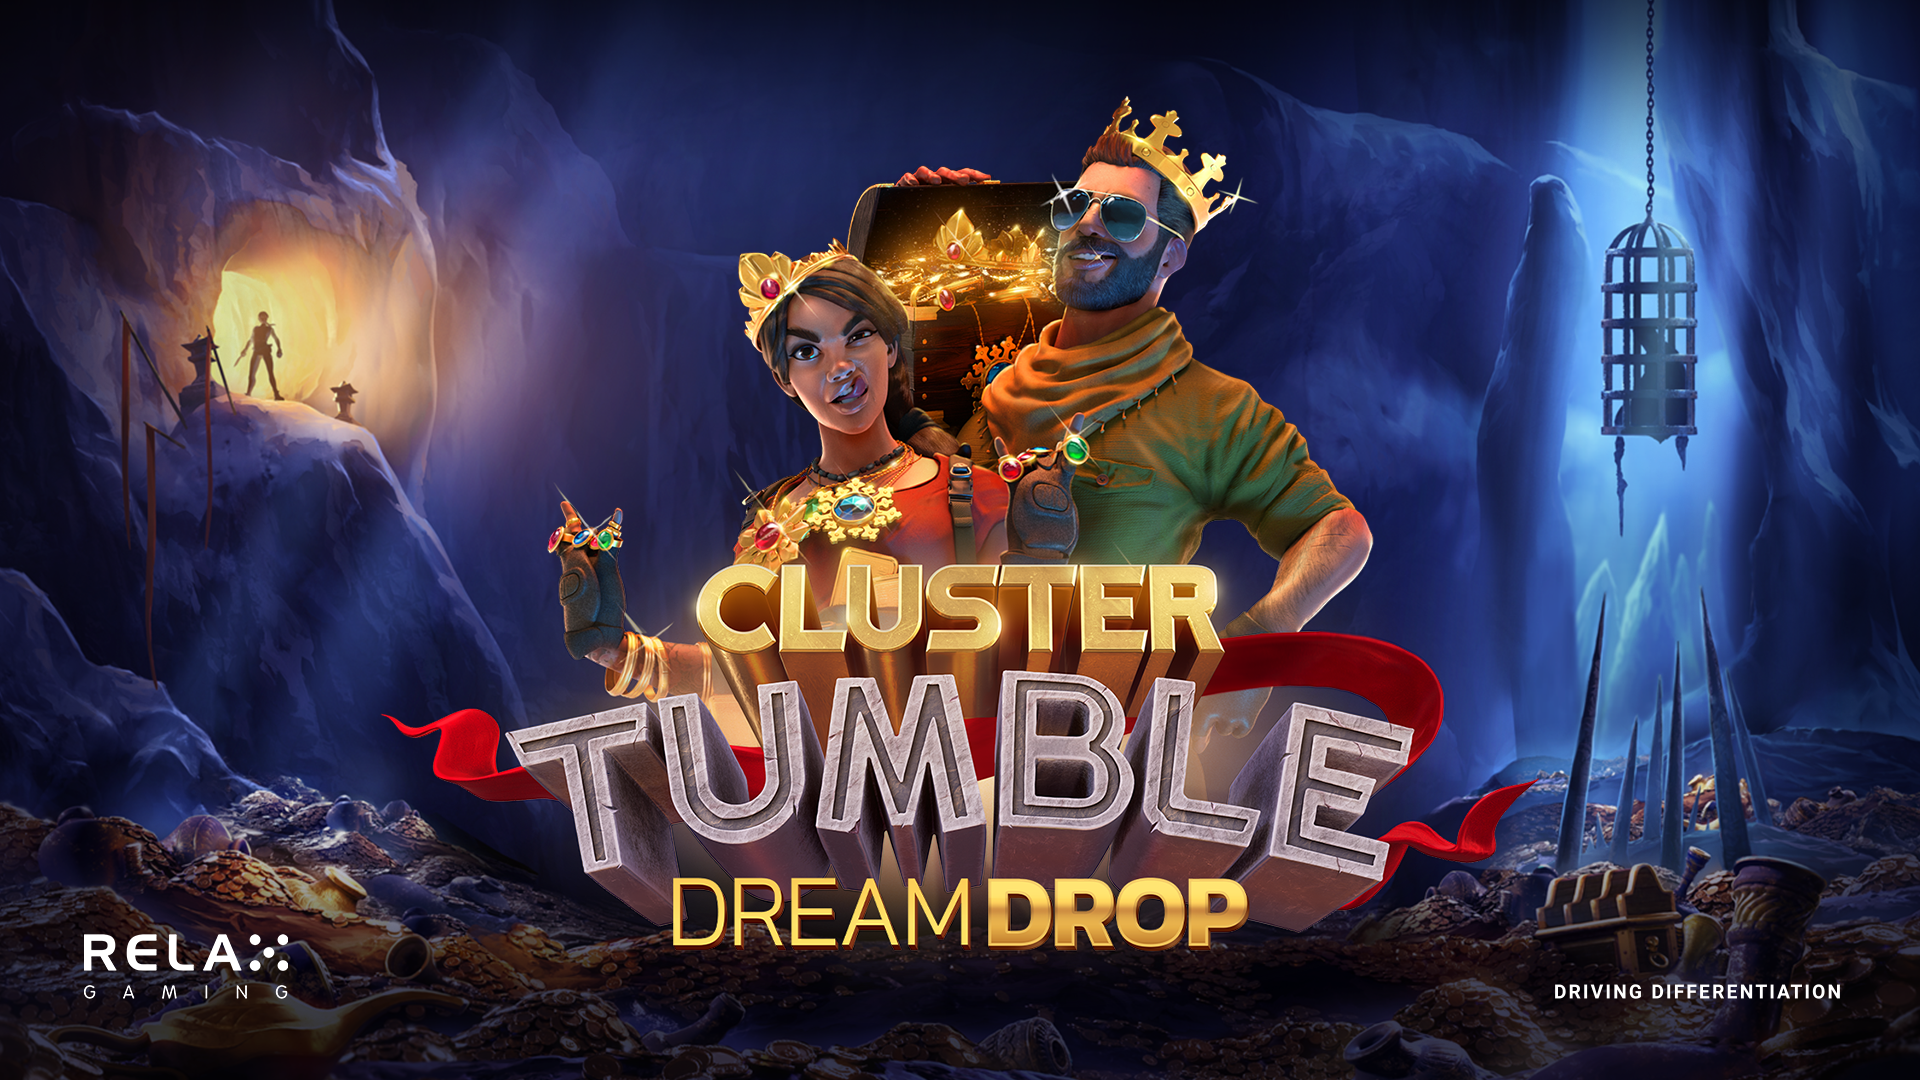 Prepare for the ultimate adventure with Relax Gaming in Cluster Tumble Dream Drop